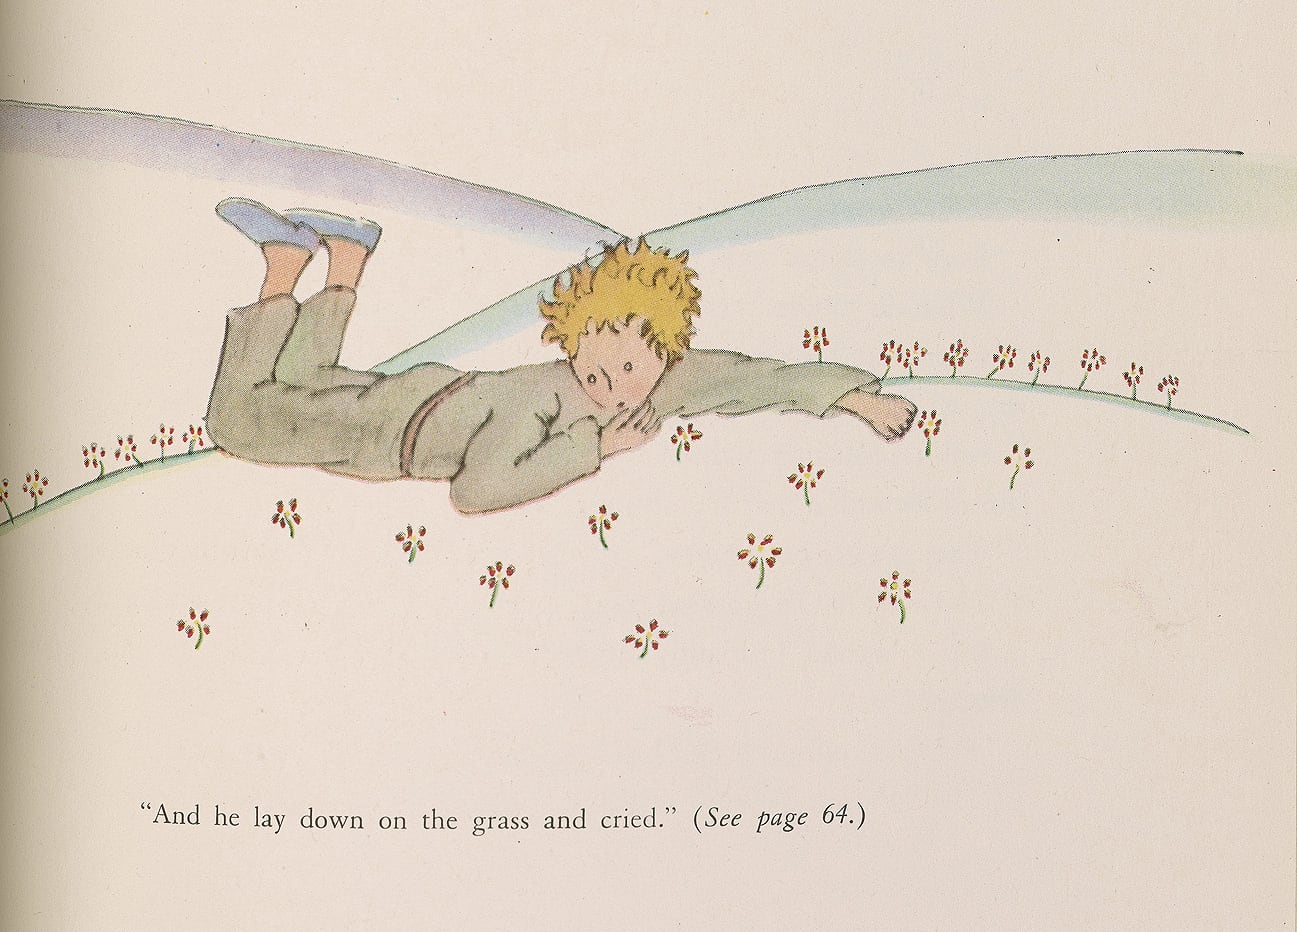 This undated photo provided by the Morgan Library and Museum shows a drawing from Antoine de Saint-Exupery's beloved childrens tale The Little Prince, which is the subject of a major exhibition at the Morgan Library and Museum in New York on the 70th anniversary of the books publication. (AP Photo/Morgan Library and Museum, Graham S. Haber) 01072014xARTSLIFE